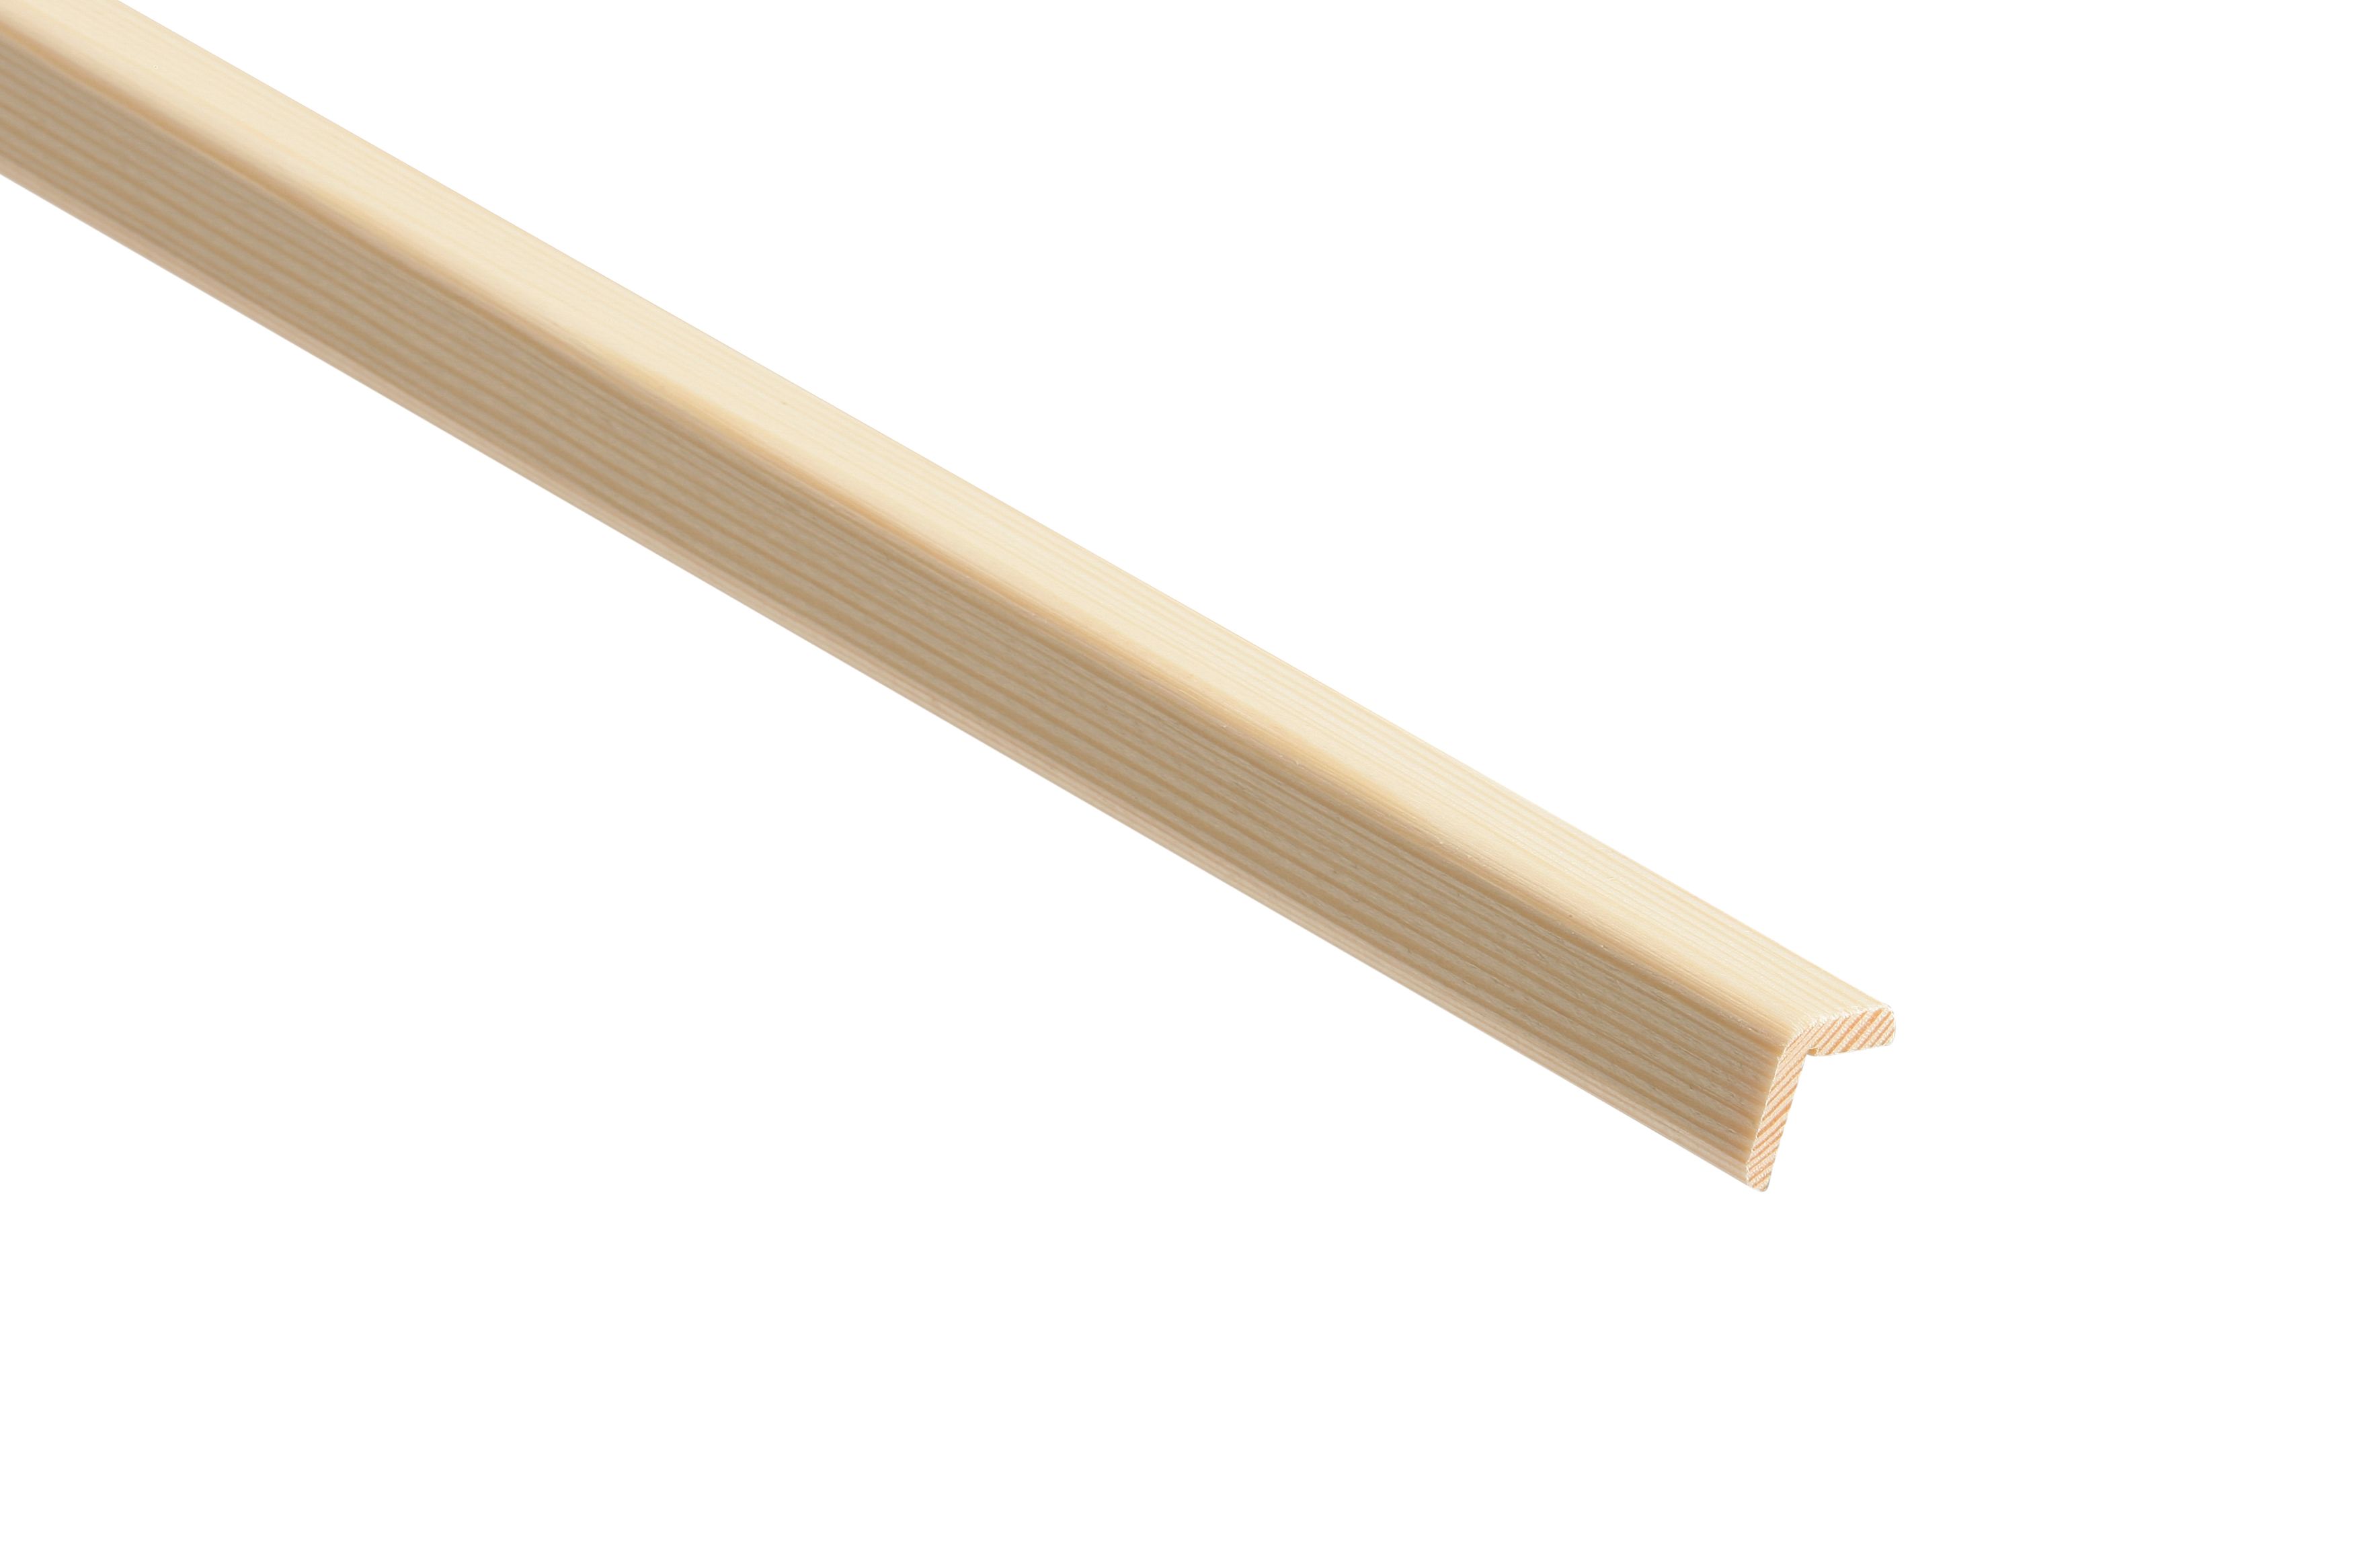 Image of Wickes Pine Cushion Corner Moulding - 27 x 27 x 2400mm